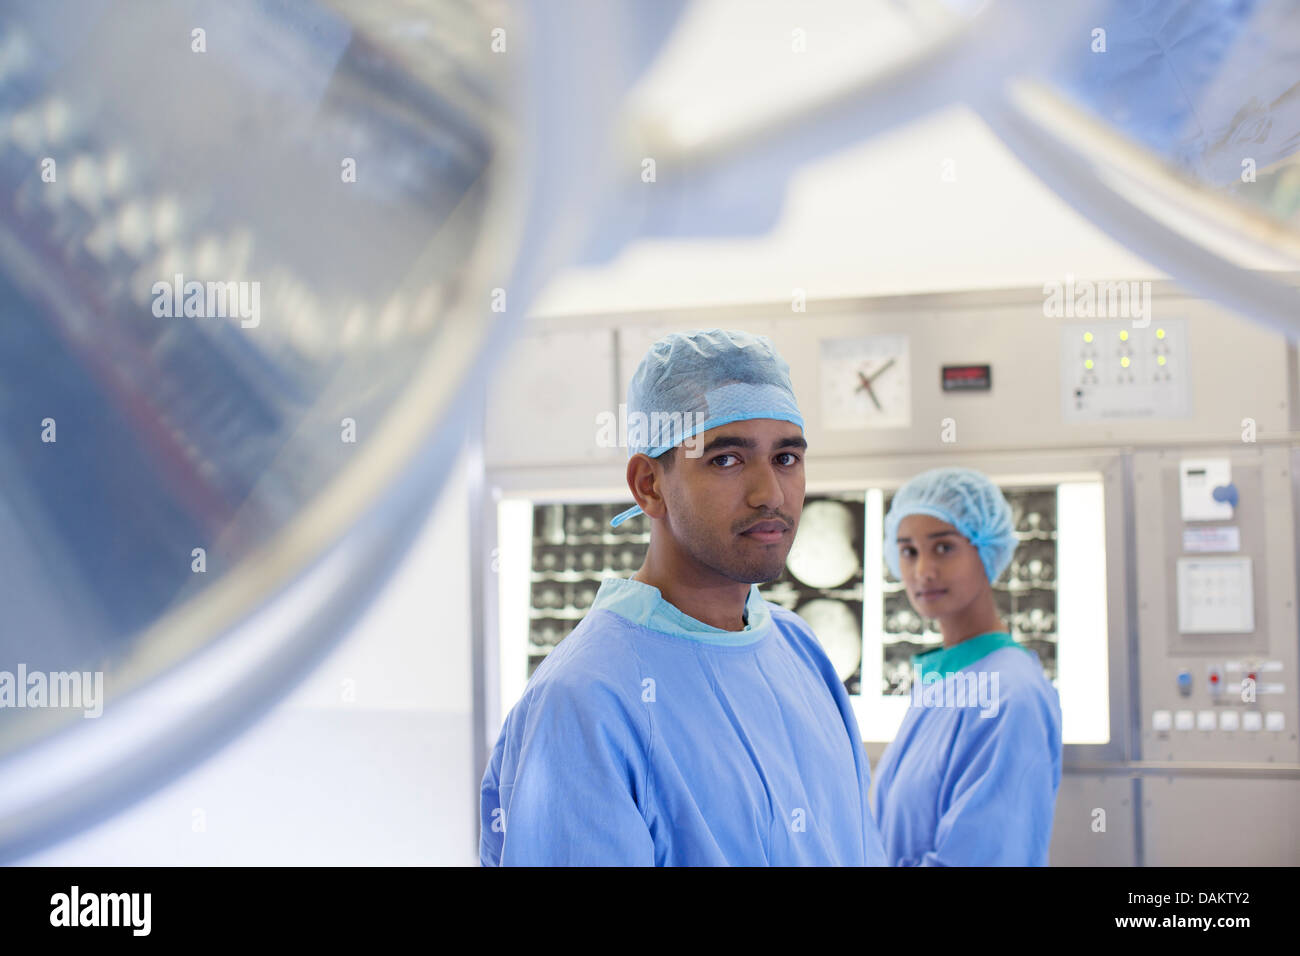 Surgeons standing in operating room Stock Photo